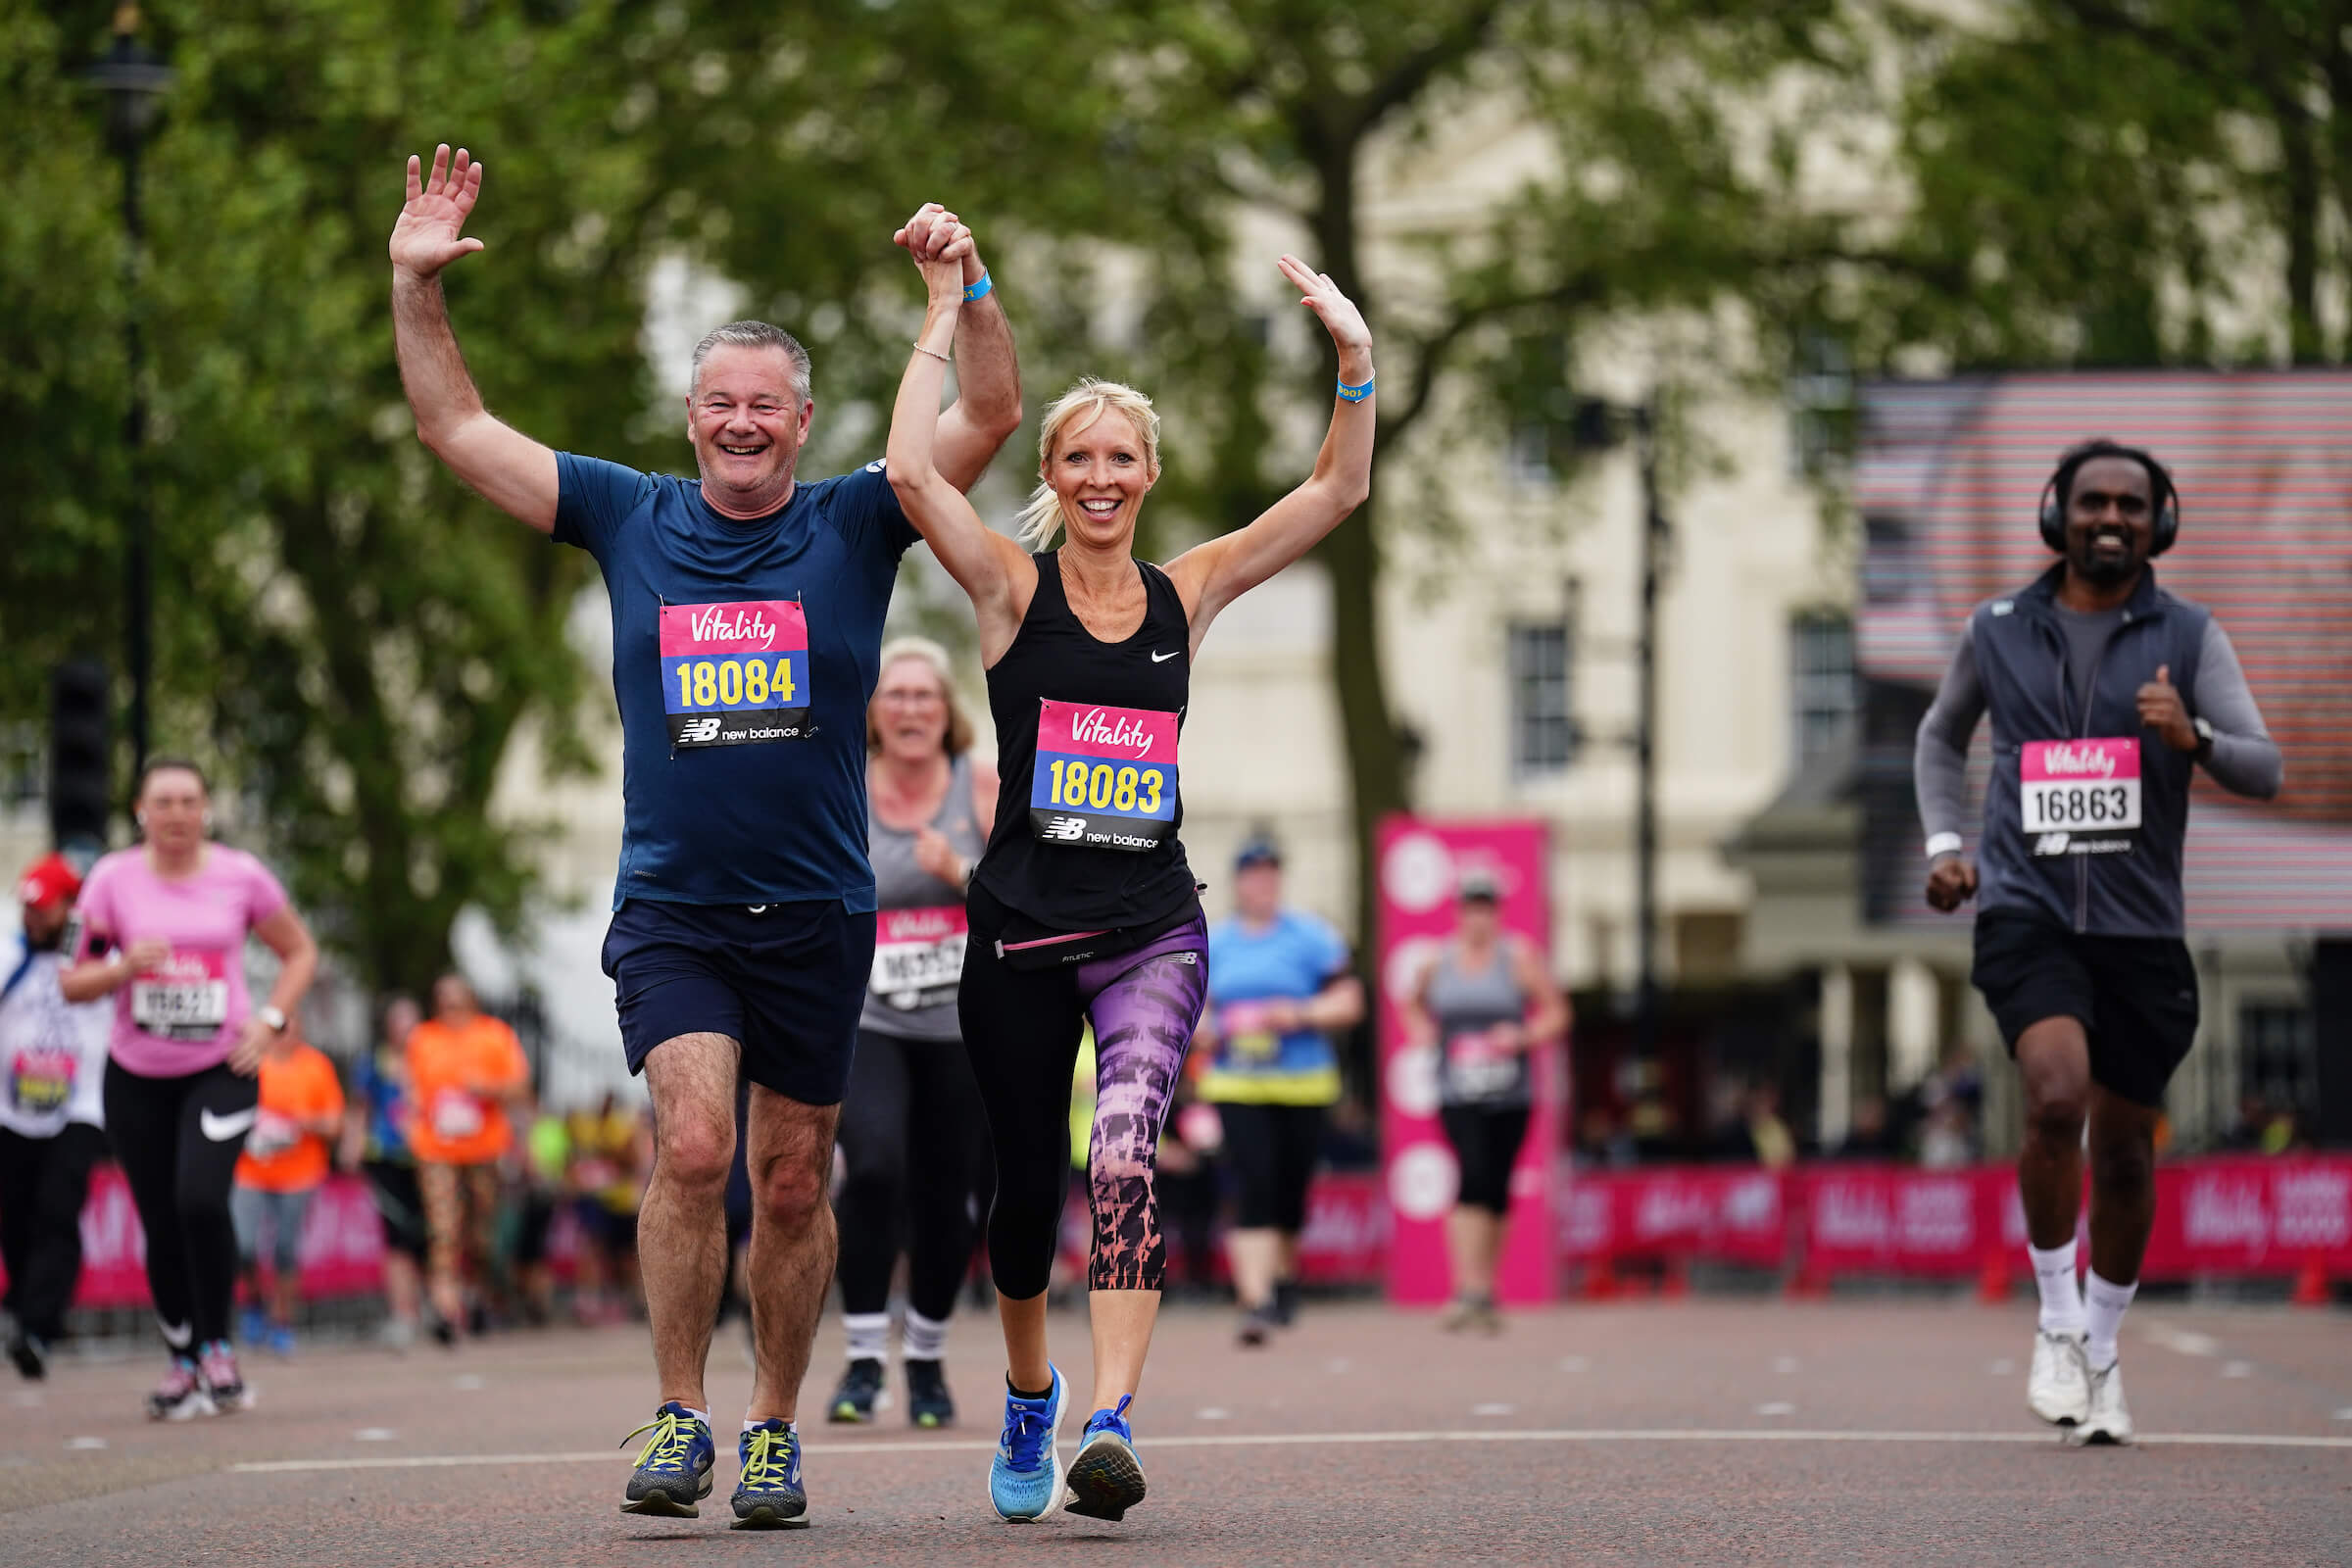 Happy participants at the Vitality London 10,000